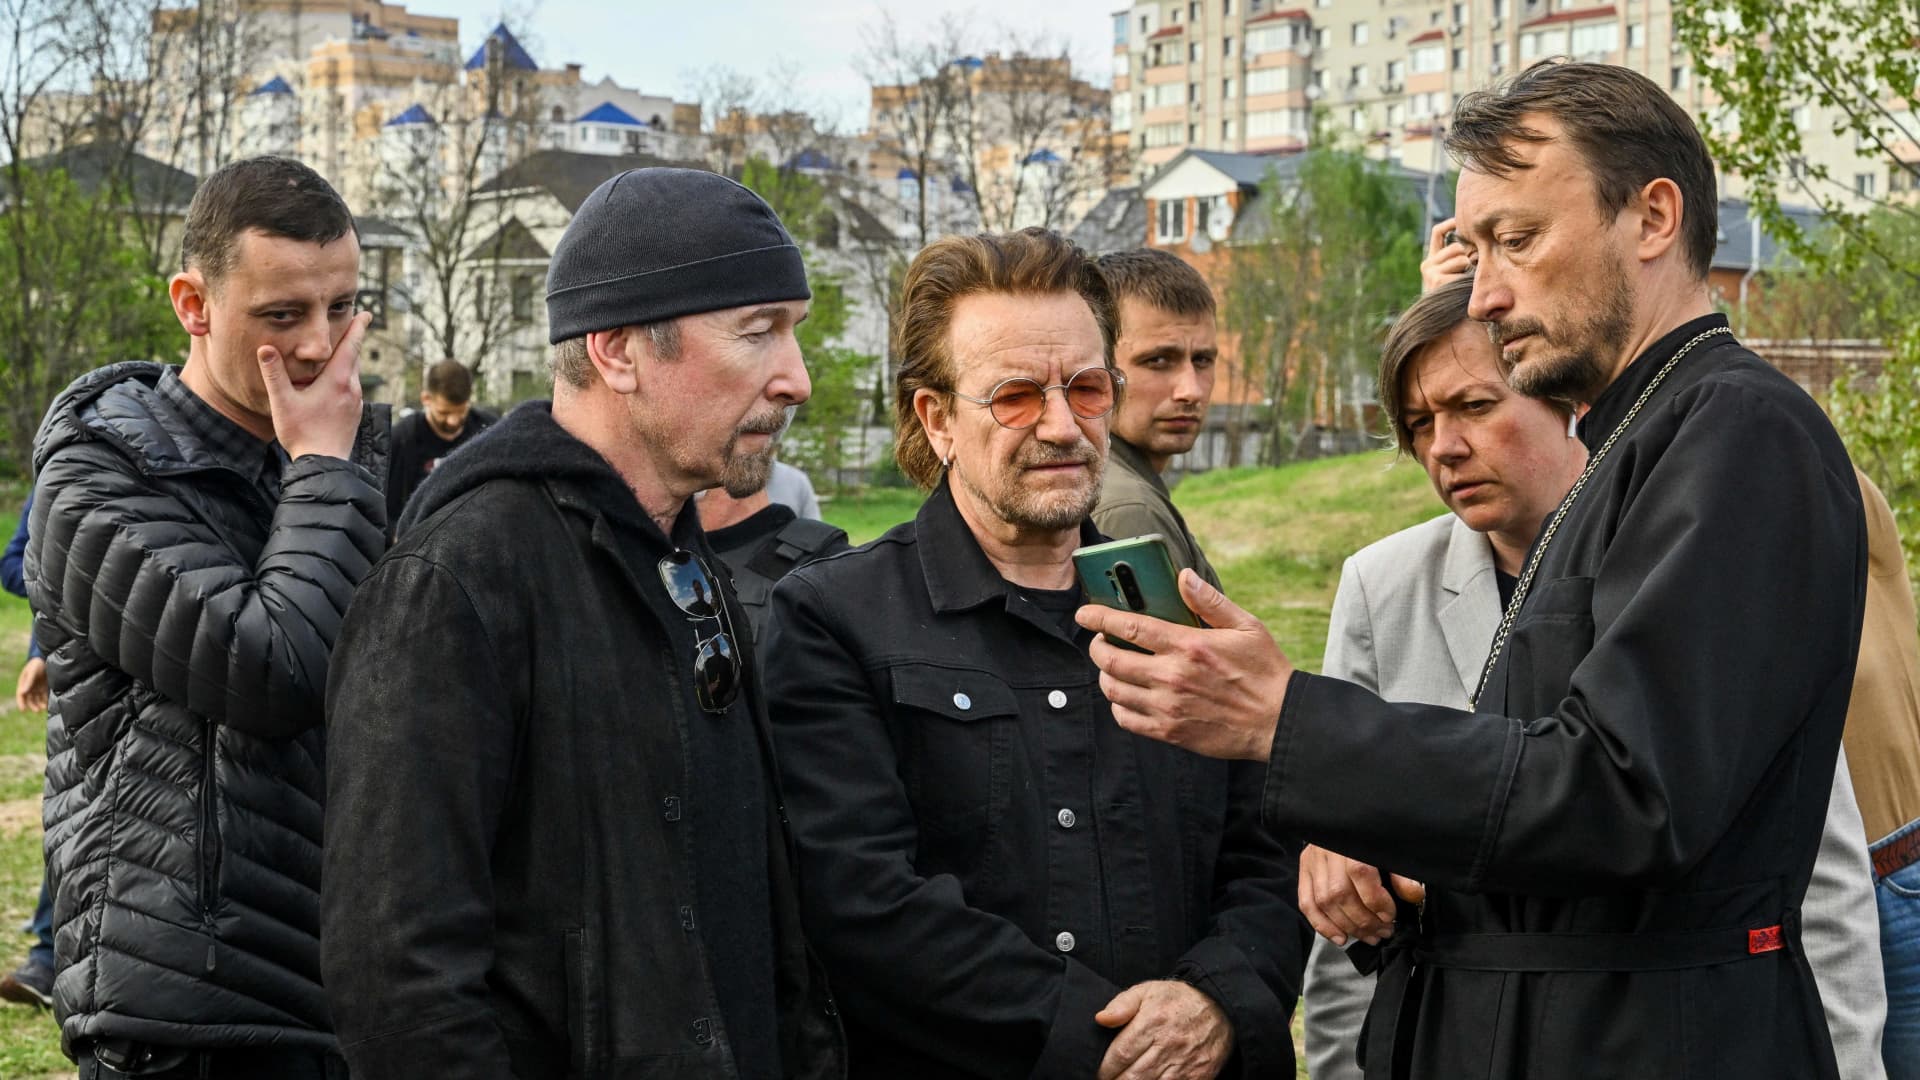 Andrii Holovine, priest of the Church of St. Andrew Pervozvannoho All Saints (R) shows Bono (C) (Paul David Hewson), activist and front man of the Irish rock band U2 and guitarist David Howell Evans aka 'The Edge' (L) images on his cell phone visiting the site of a mass grave by the church in the Ukrainian town of Bucha, near Kyiv on May 8, 2022.